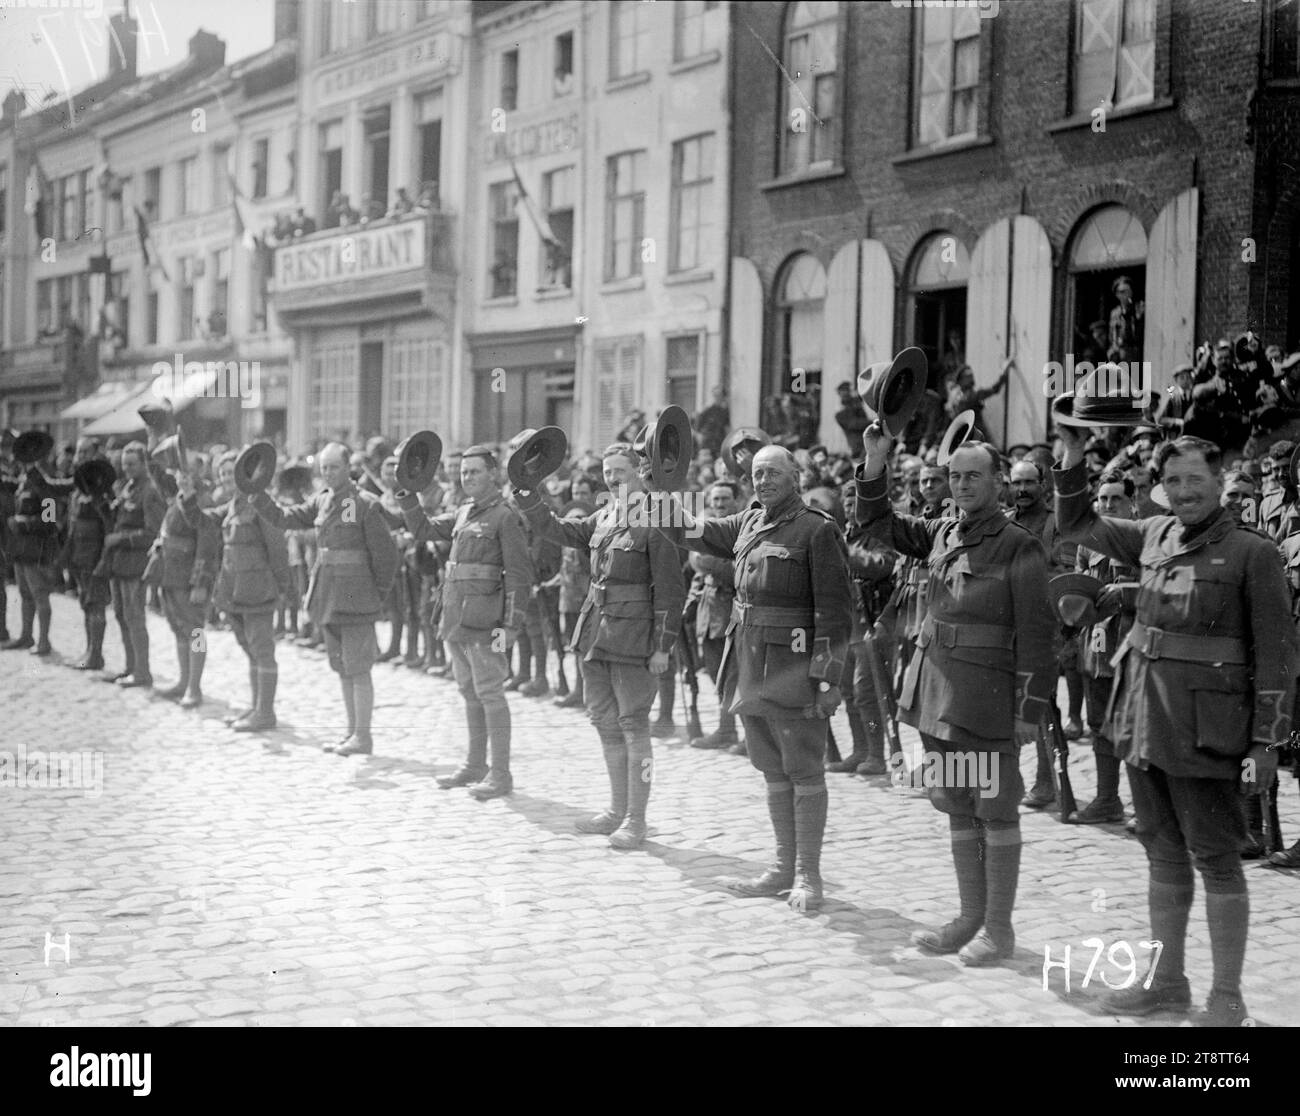 New Zealand army officers give three cheers for the King, New Zealand officers, standing in a line, take off their hats as they give three cheers for King George V at a military parade to celebrate victory at the Battle of Messines. The parade was held in the town square of Bailleul in France. Photograph taken 26 June 1917 Stock Photo